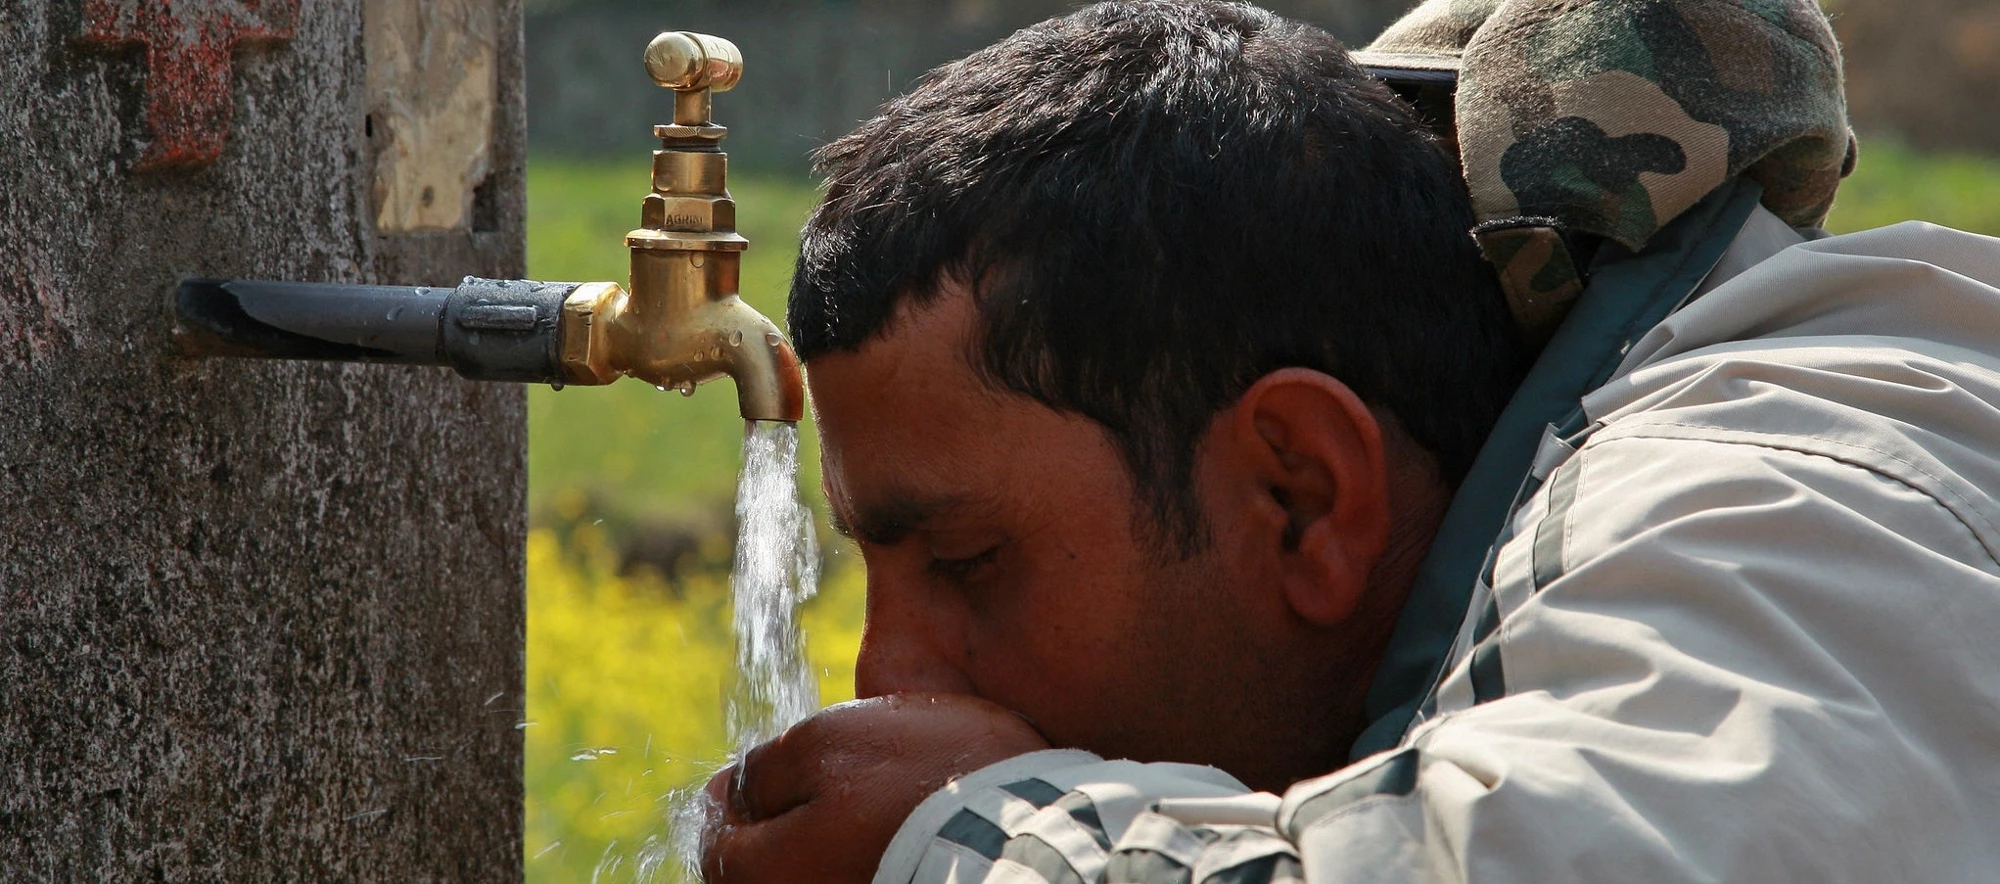 Man drinking from water tap. Photo by Simone D. McCourtie